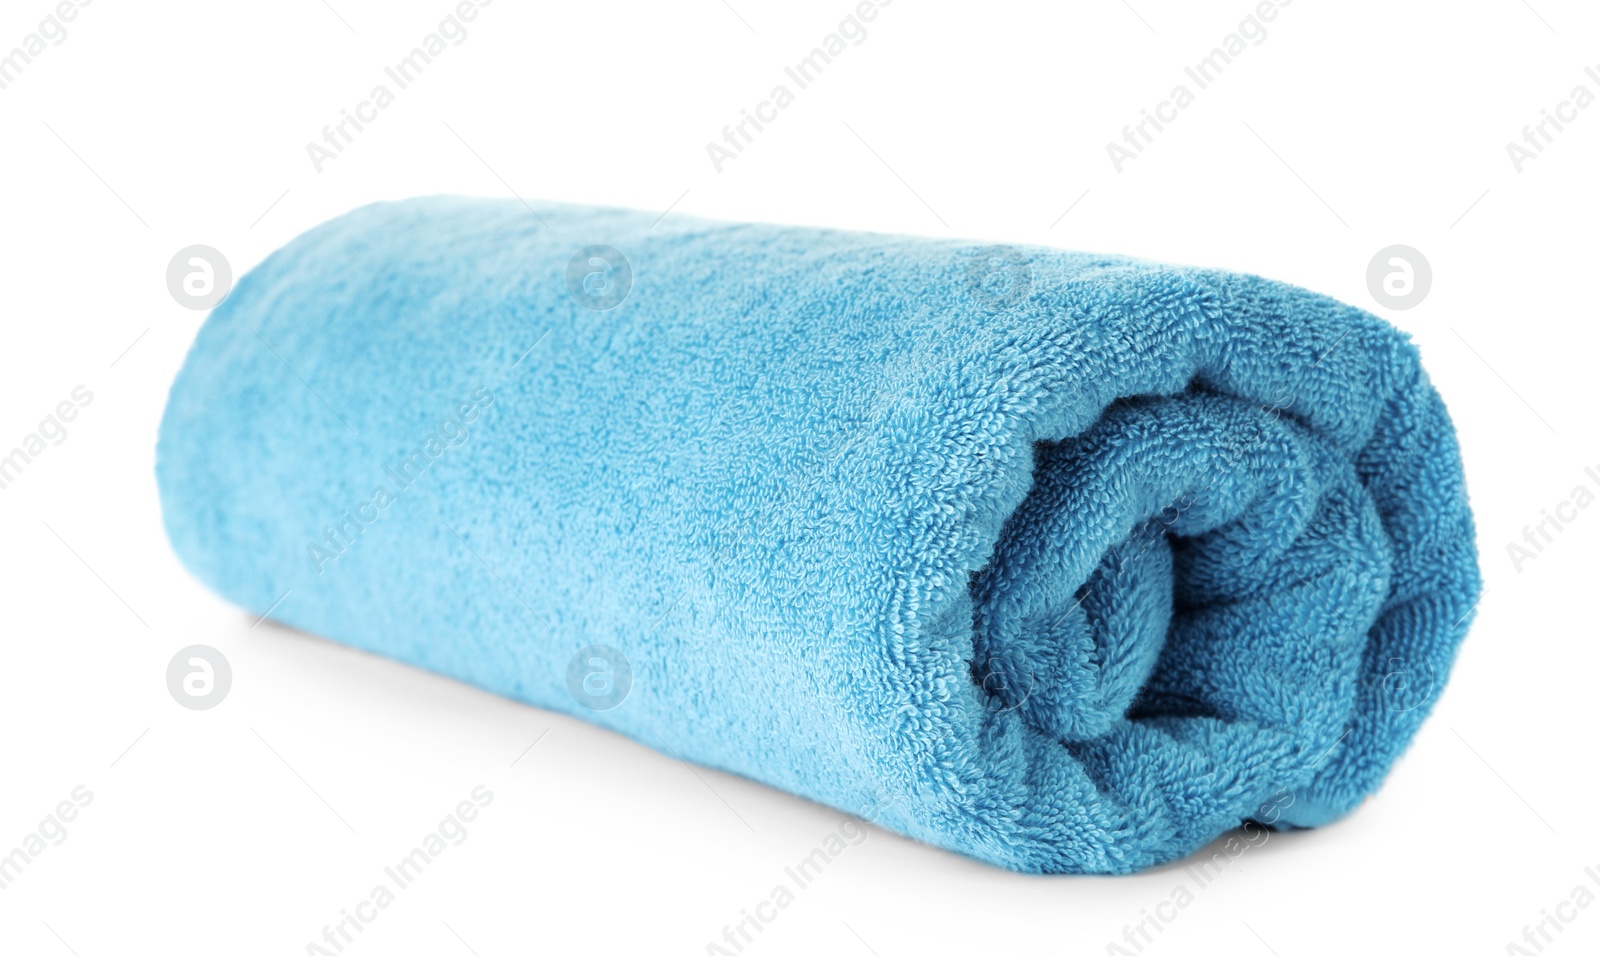 Photo of Rolled clean blue towel on white background